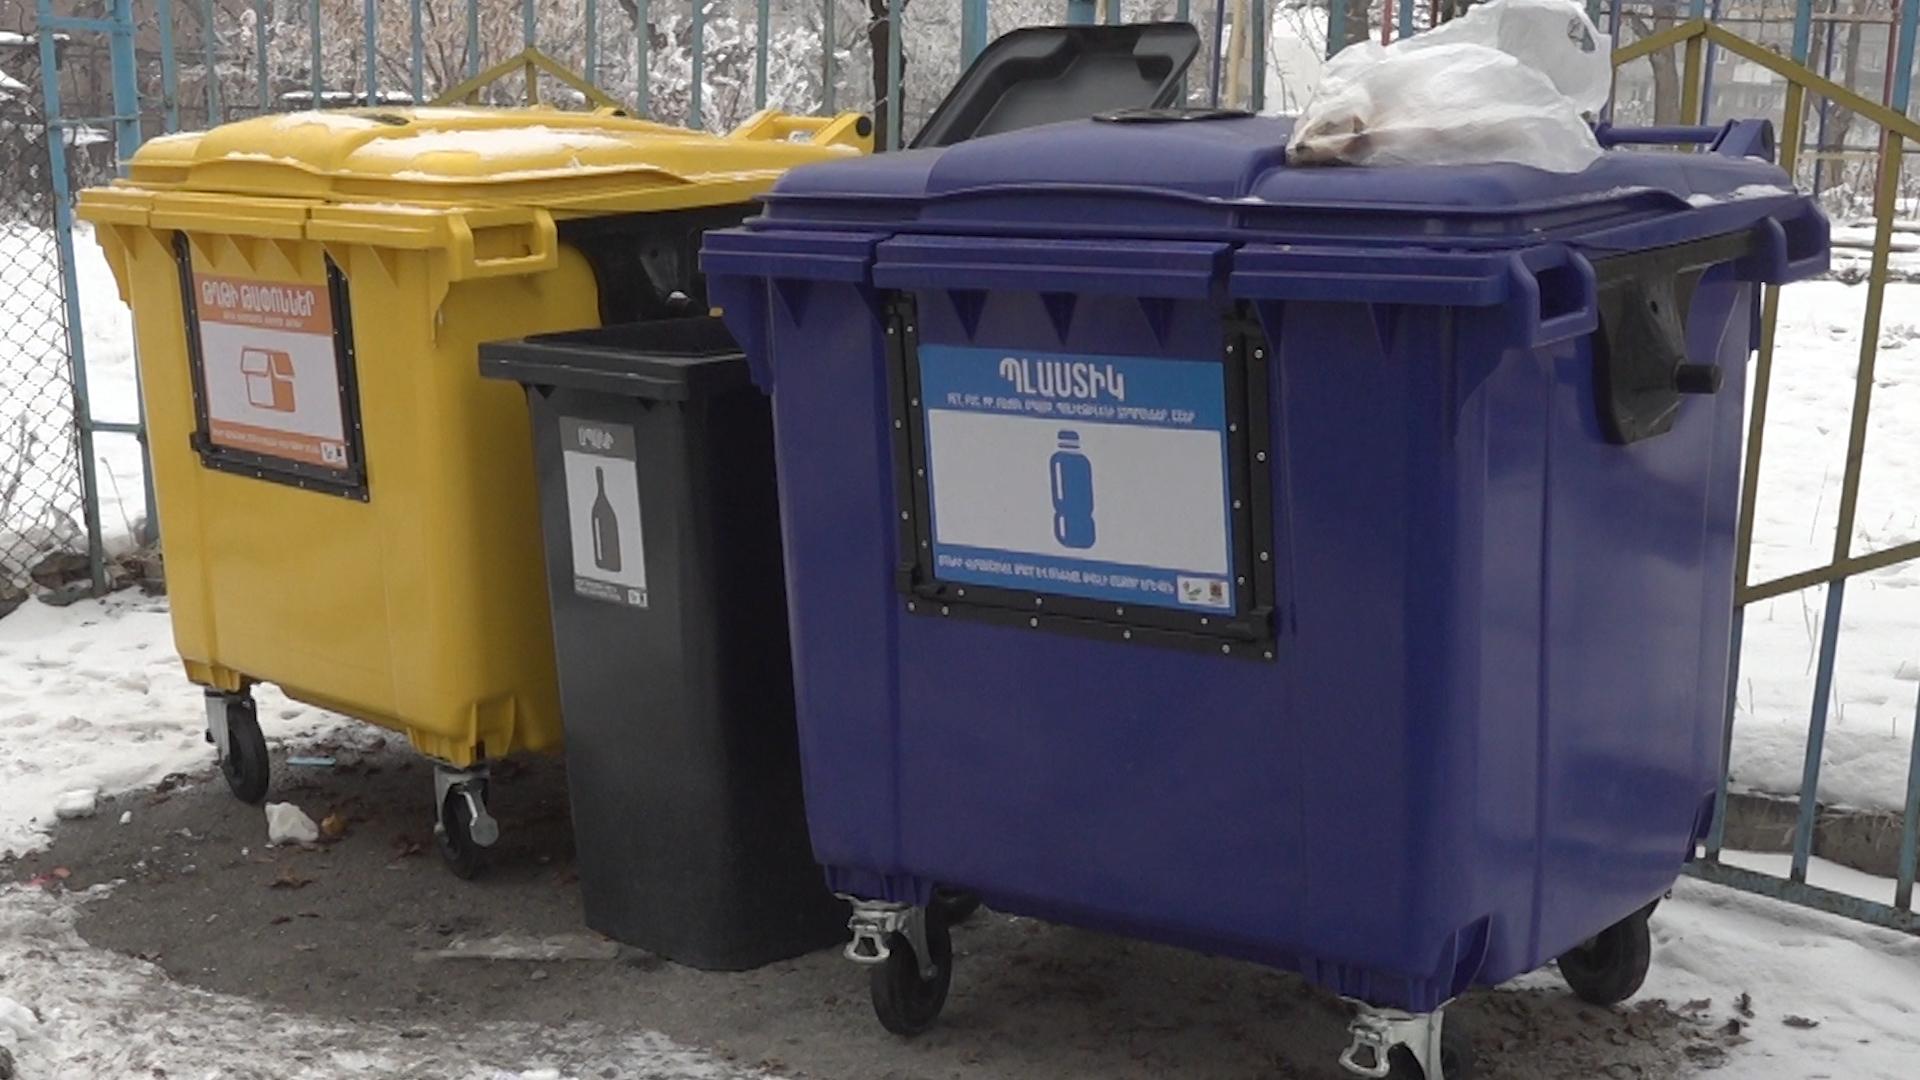 Yerevan Sees Its first set of Recycling Bins, but Not Without Problems